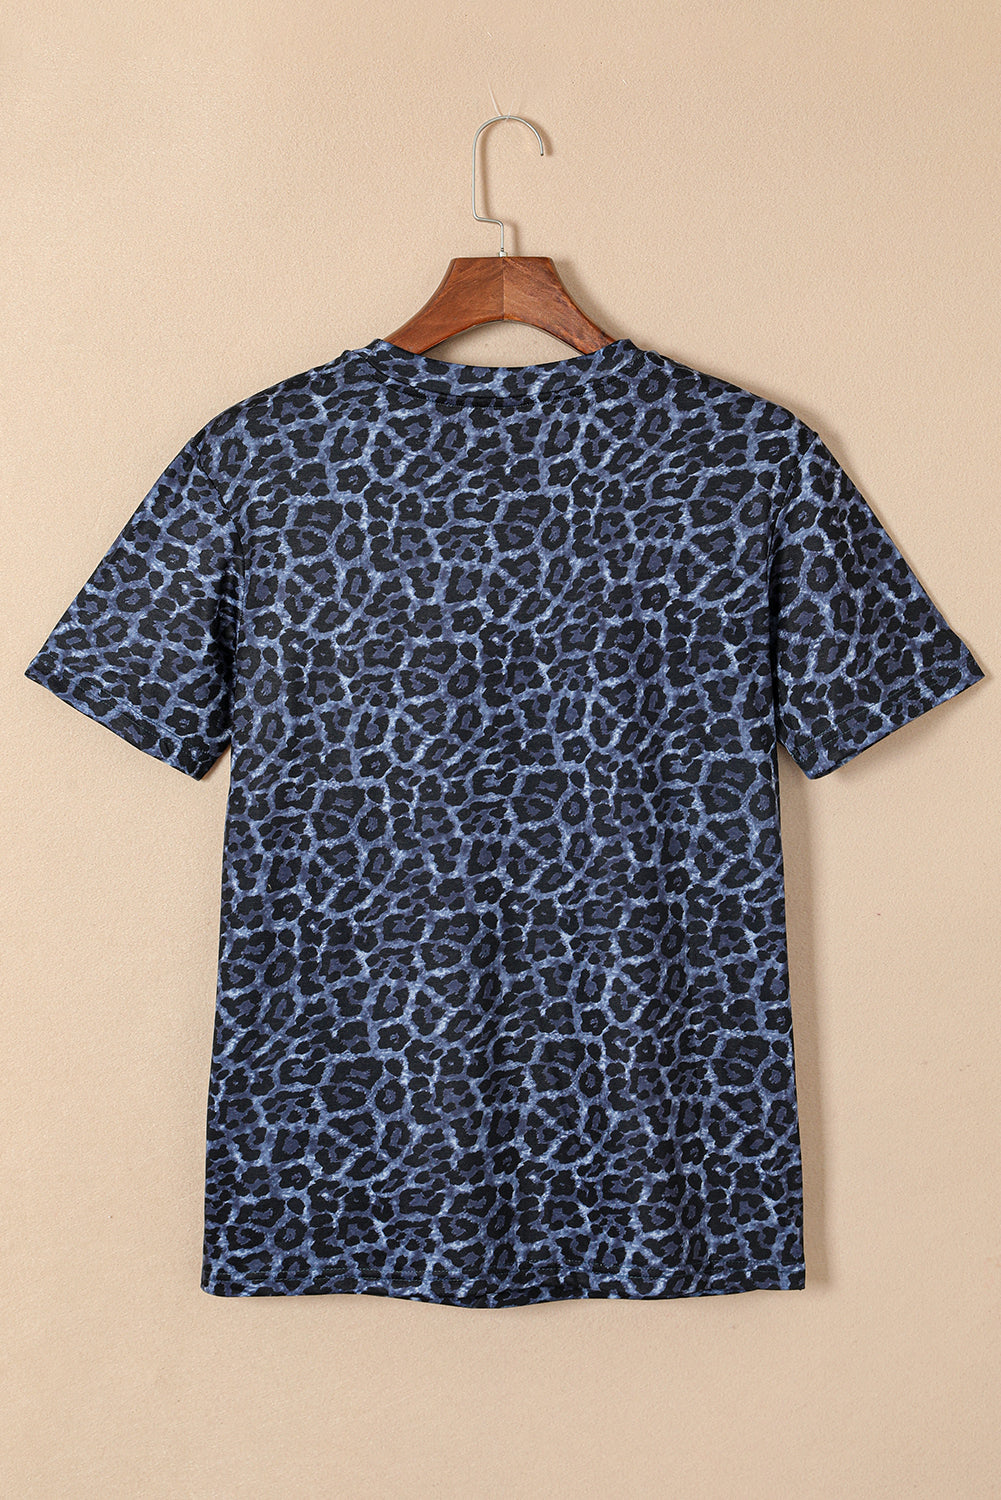 Black Leopard WILD like the WEST Letter Print Graphic Tee